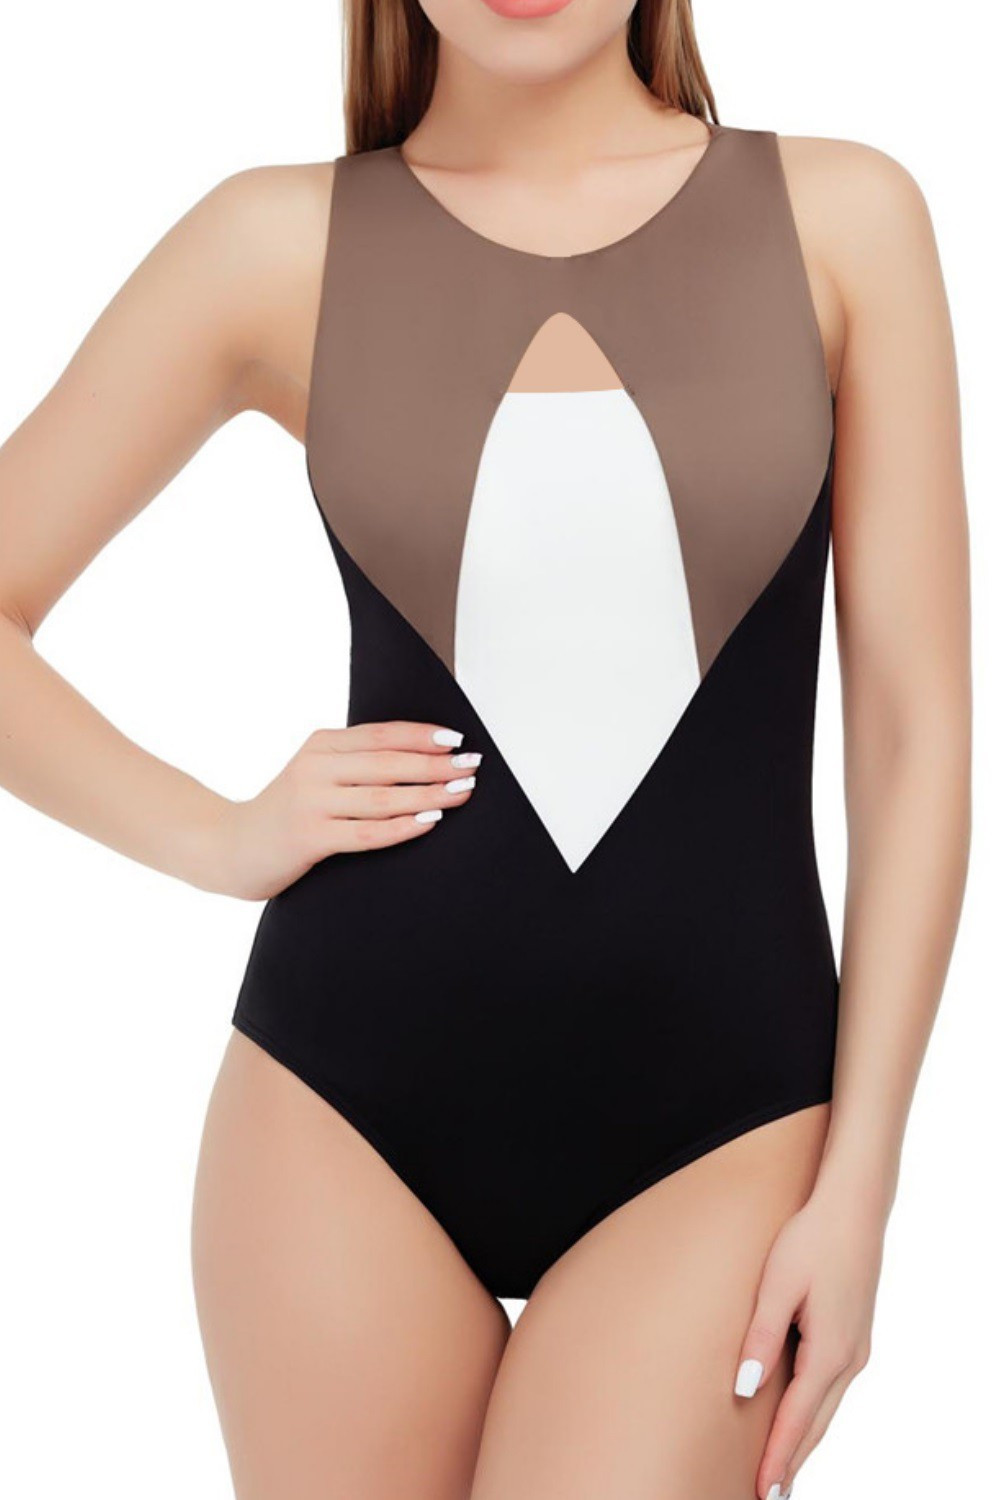 Black and brown one-piece swimsuit